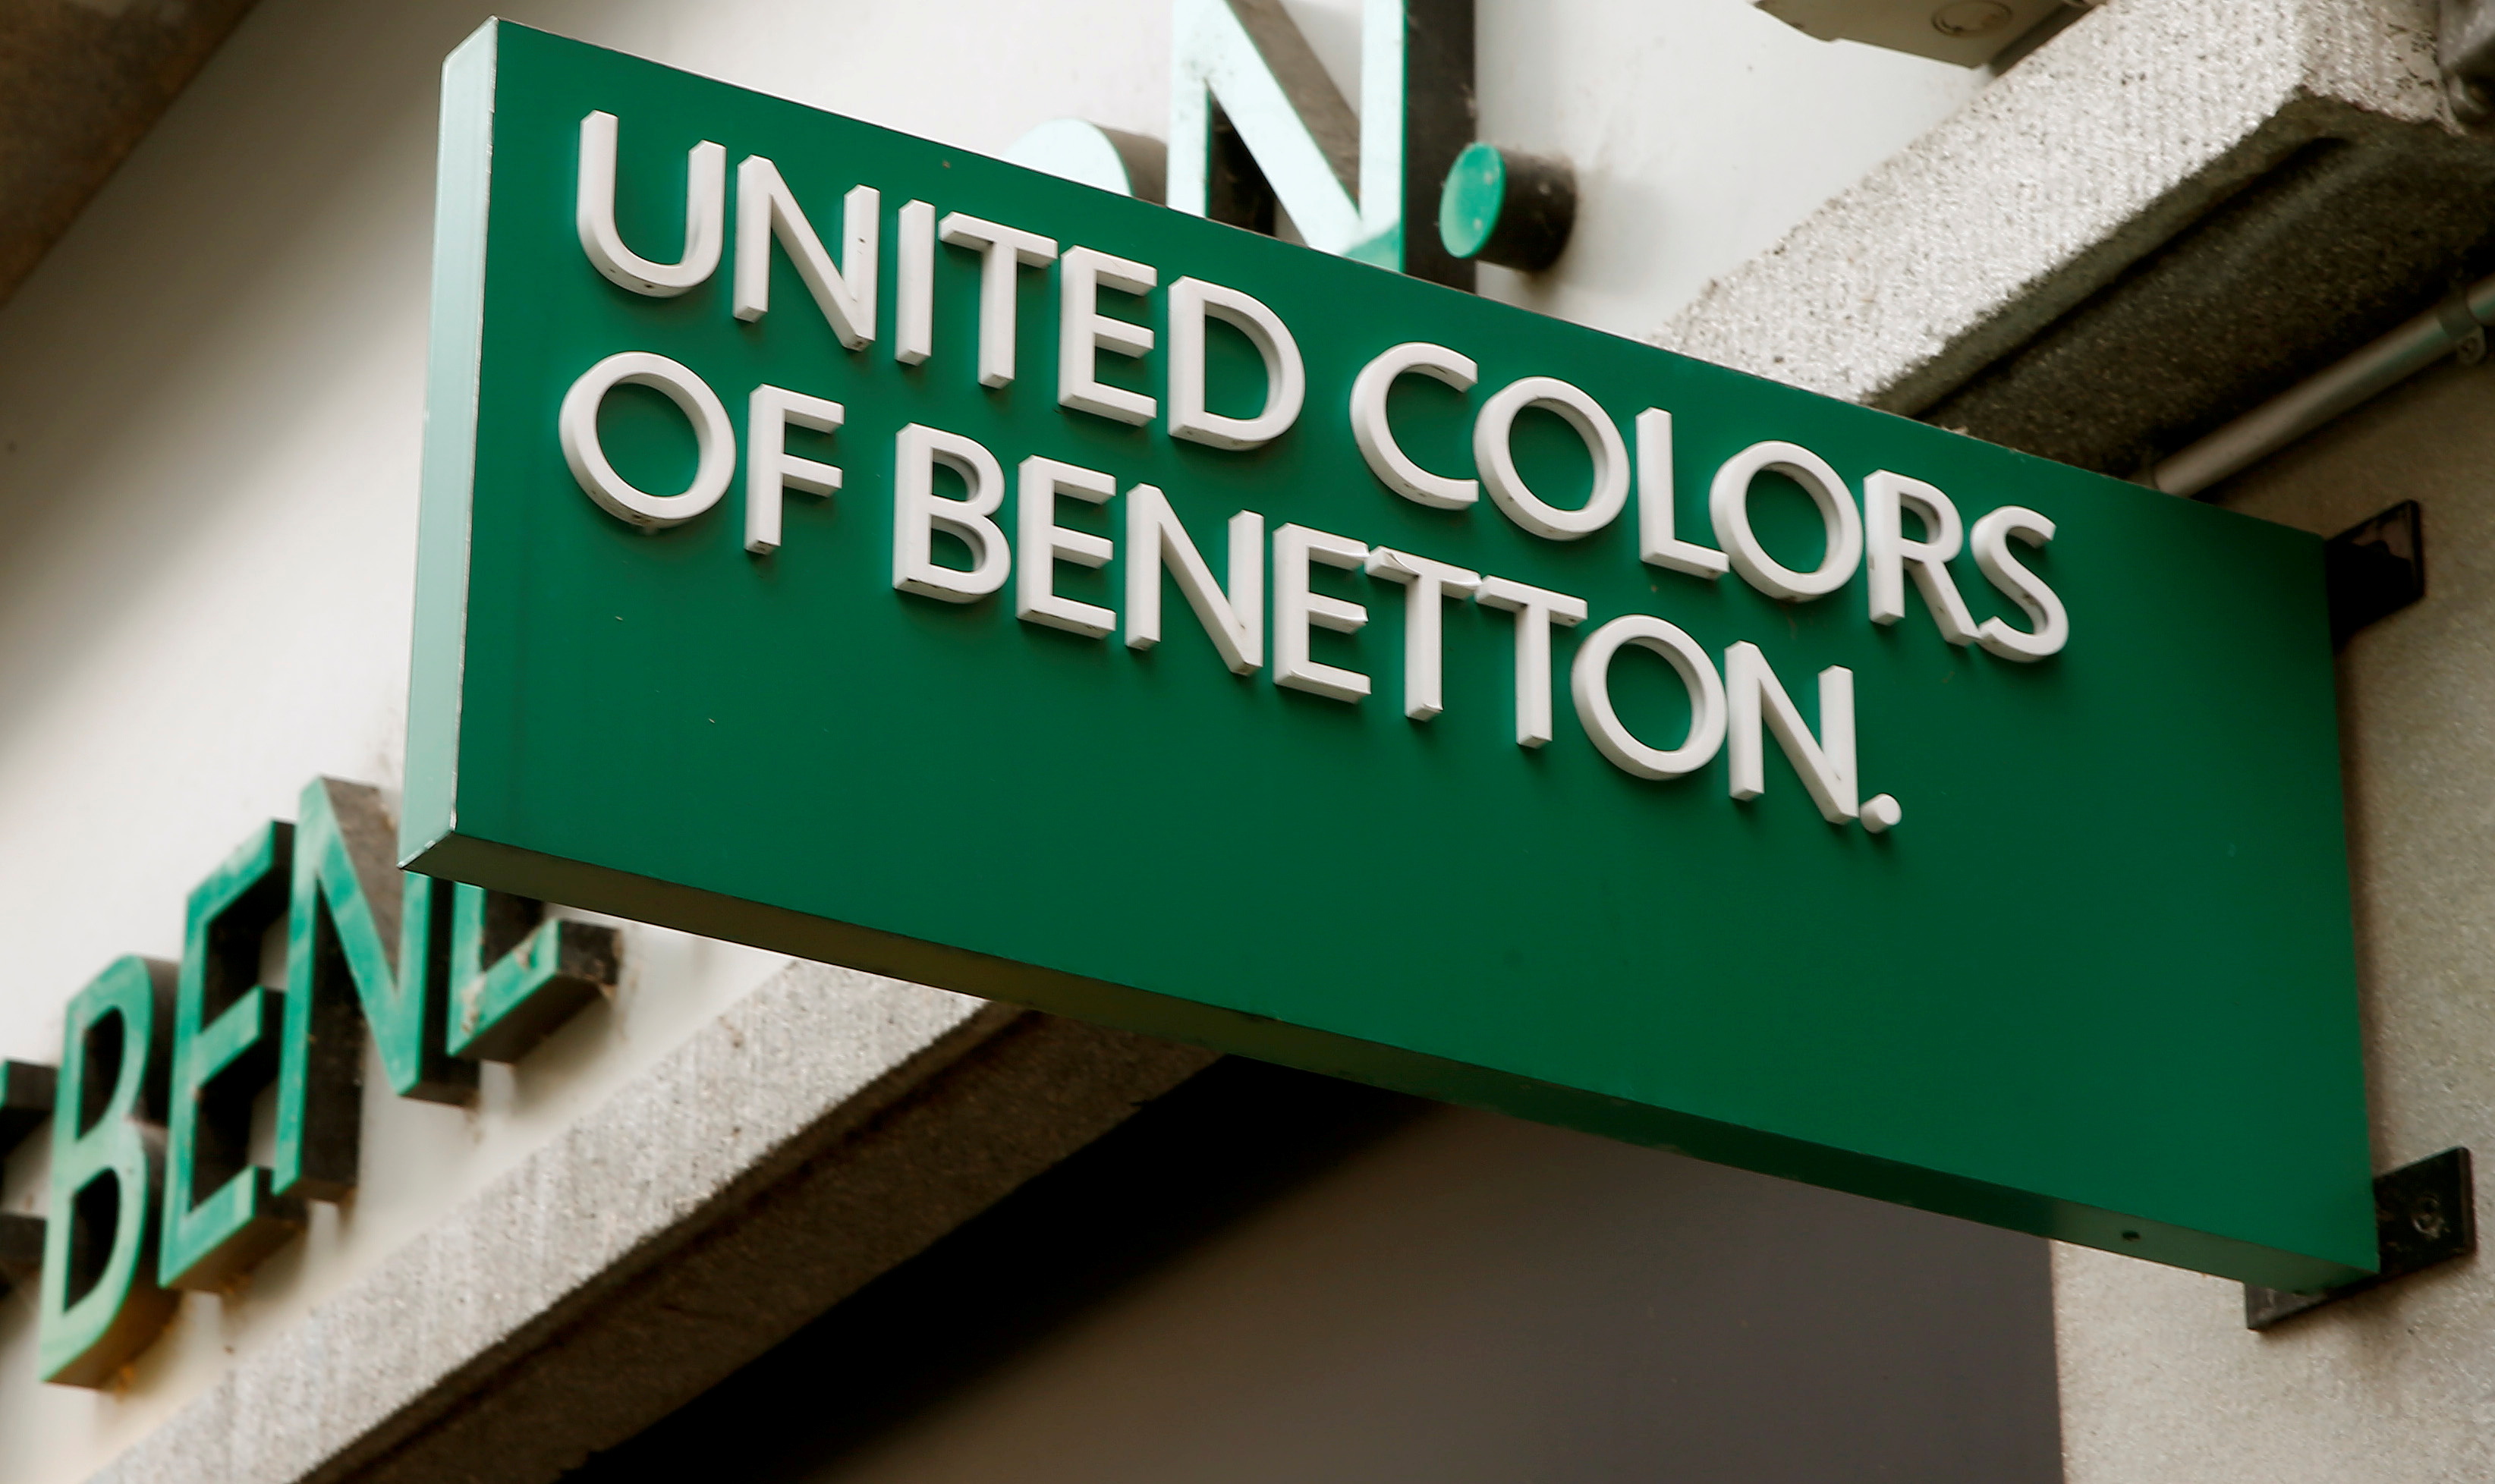 The logo of Italian fashion group Benetton is seen at a store in Zurich